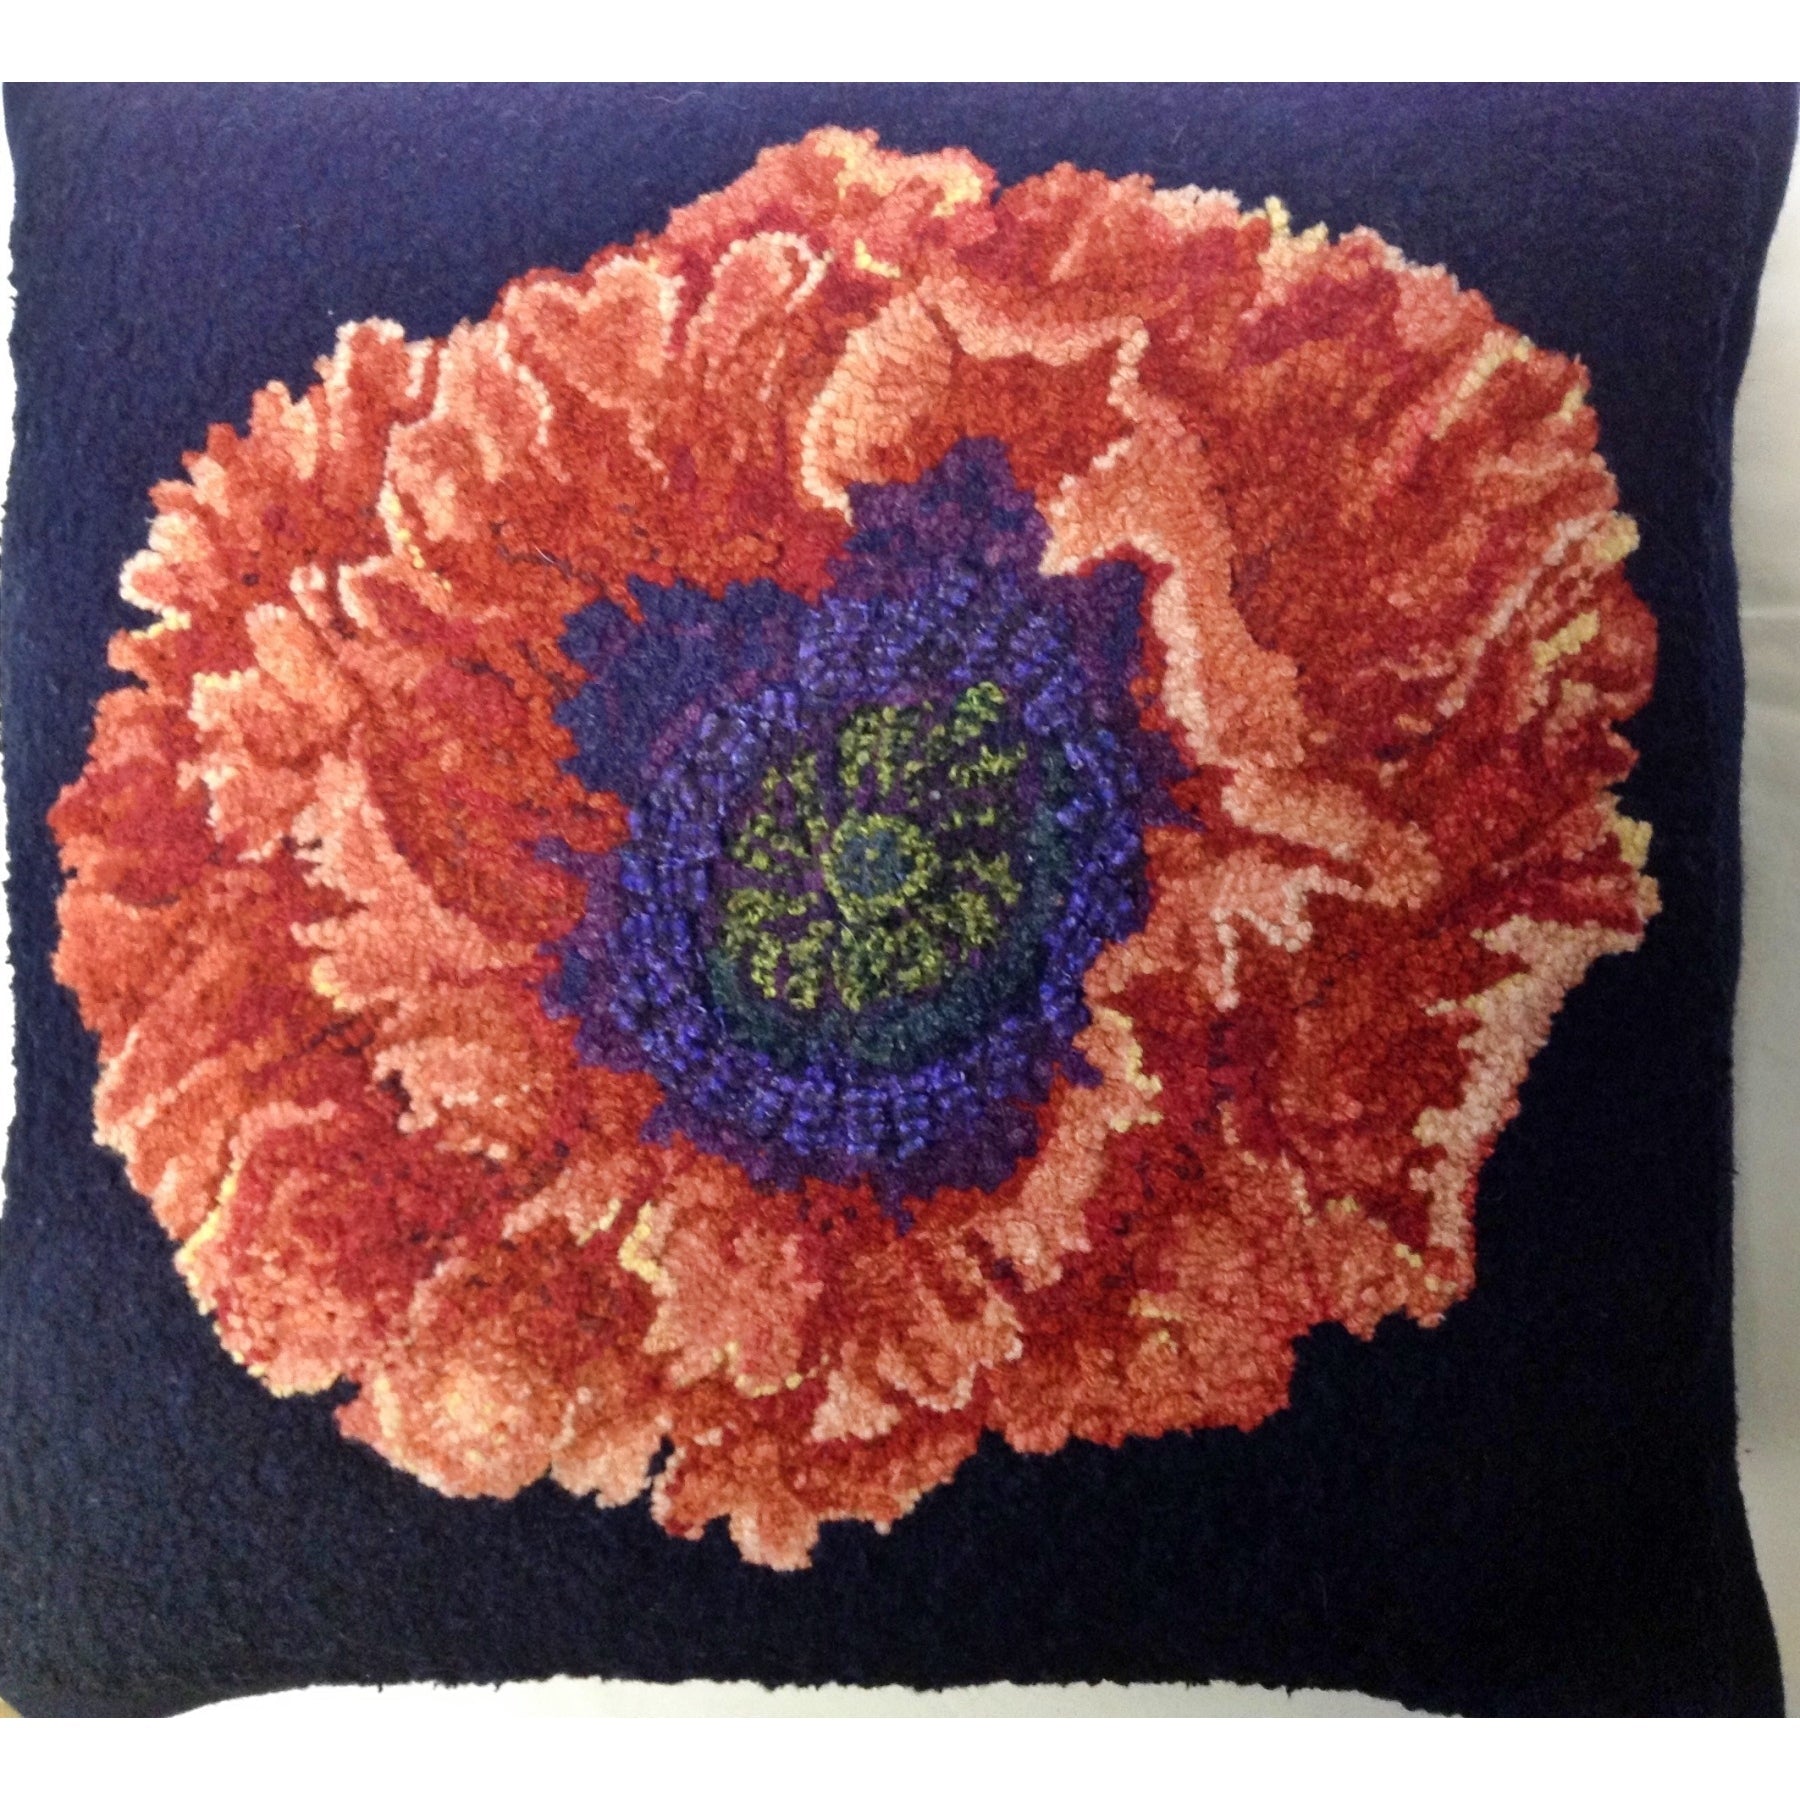 Poppy-A La O'Keefe, rug hooked by Pam Papp